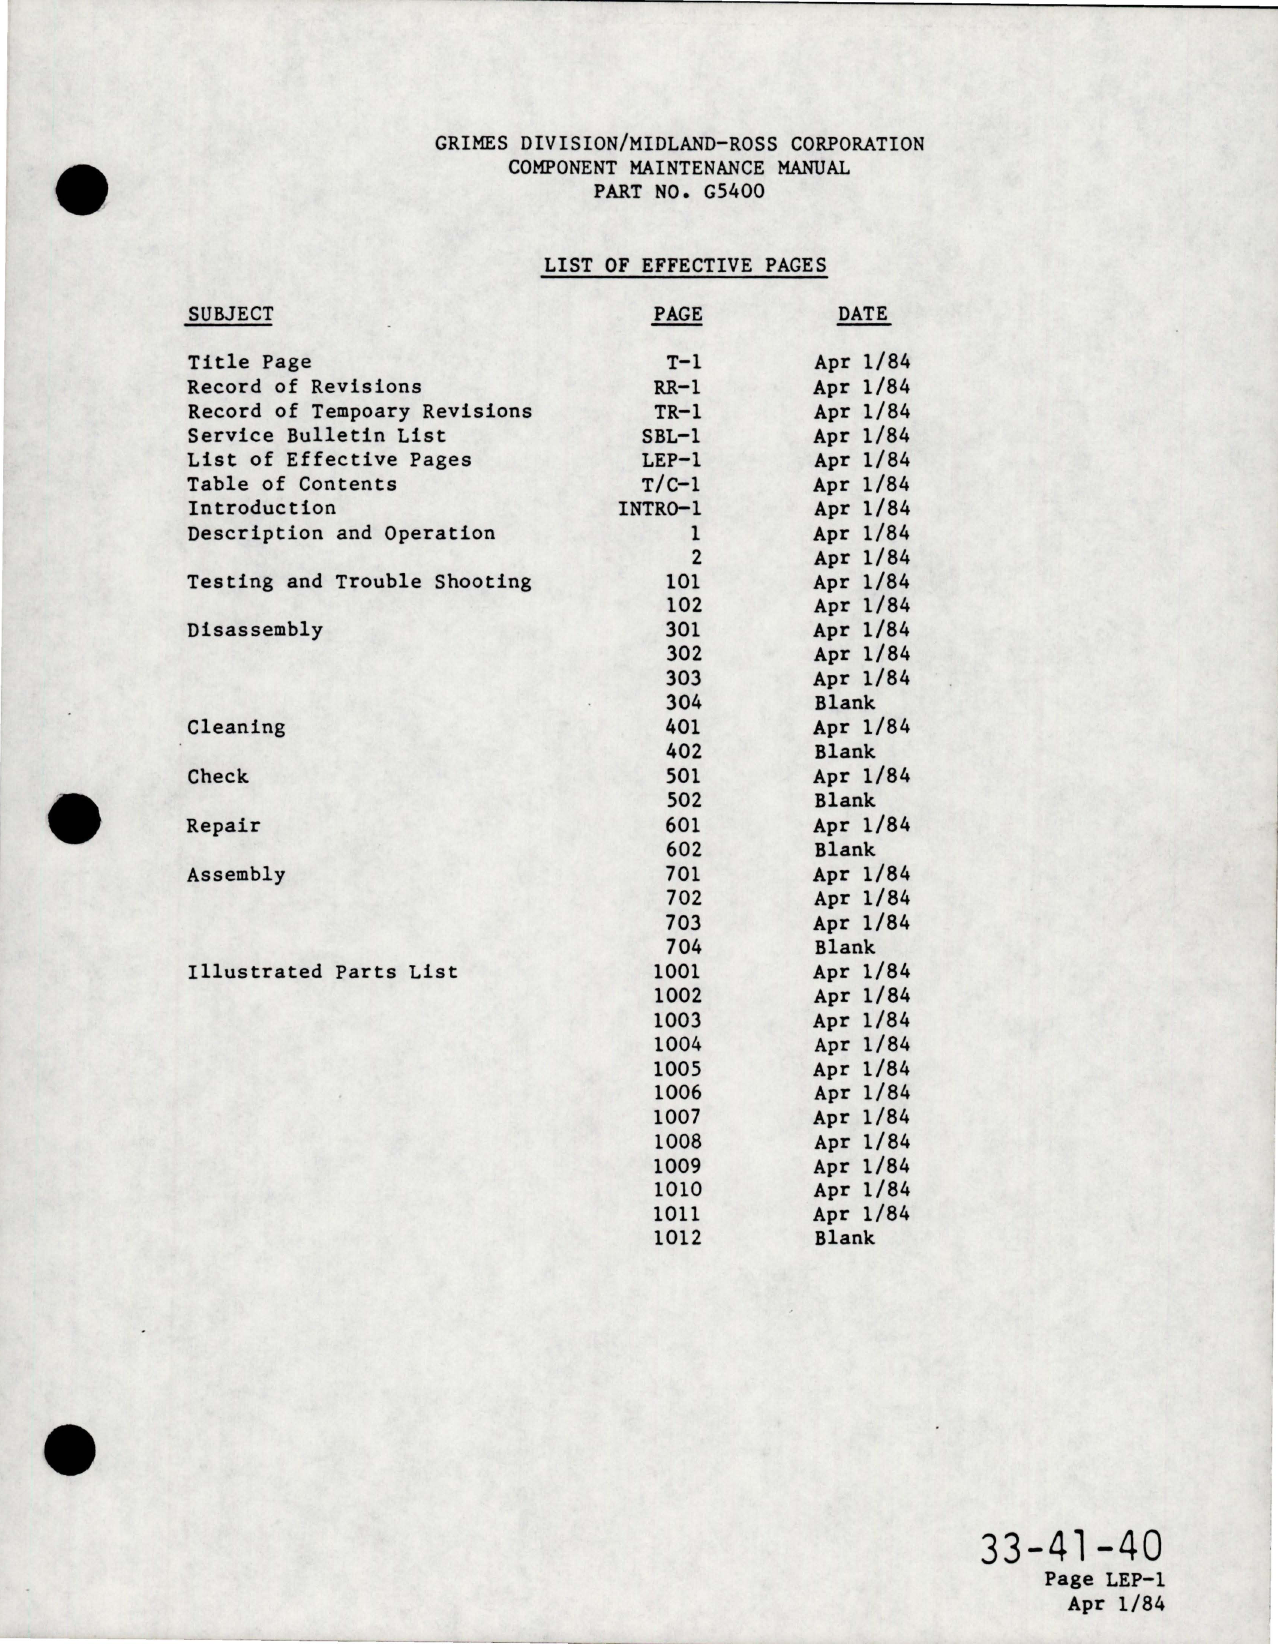 Sample page 5 from AirCorps Library document: Maintenance Manual for Landing Light - Part G5400 Series 